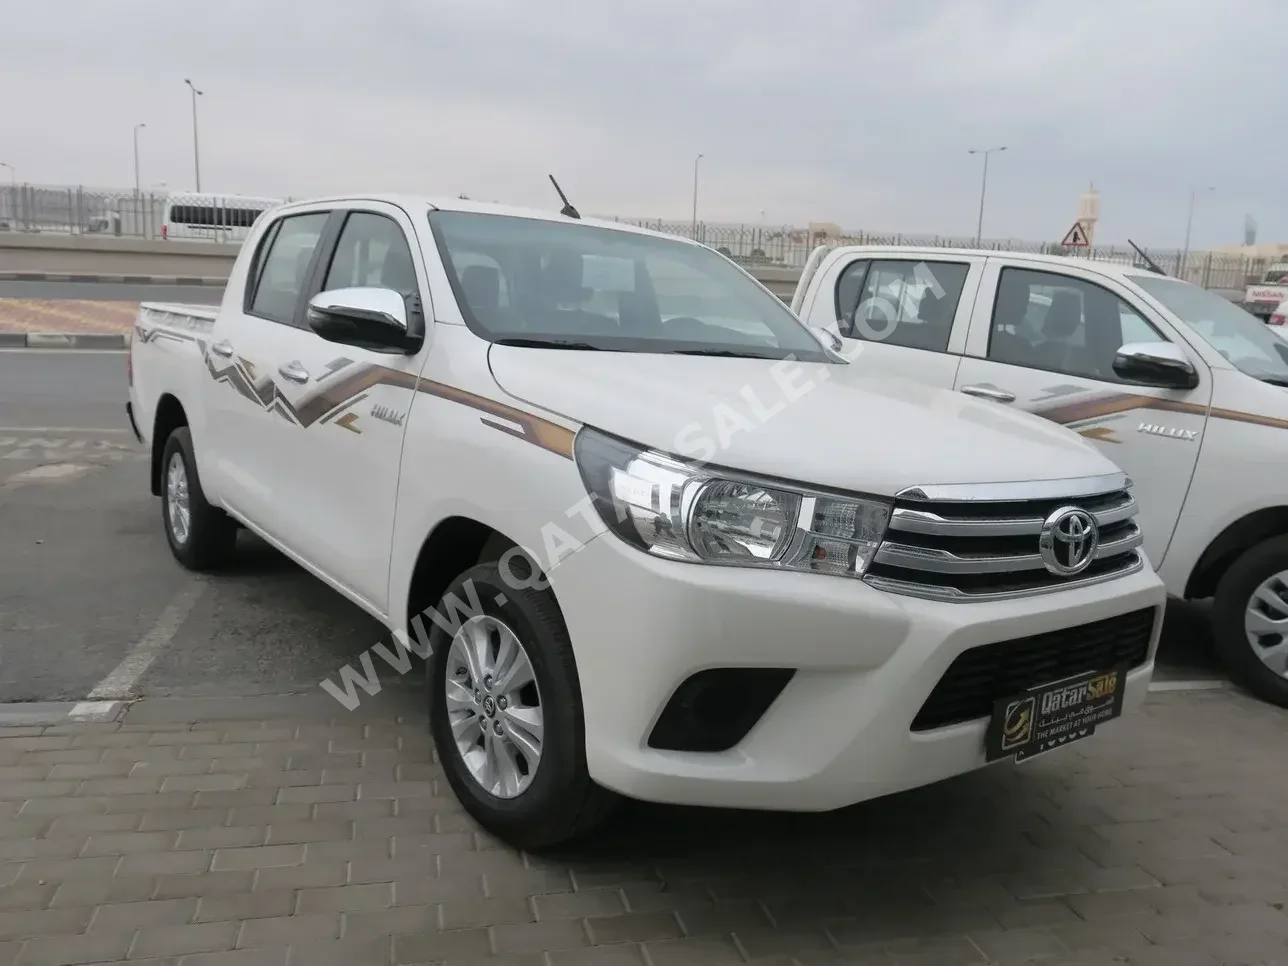 Toyota  Hilux  2024  Manual  0 Km  4 Cylinder  Rear Wheel Drive (RWD)  Pick Up  White  With Warranty